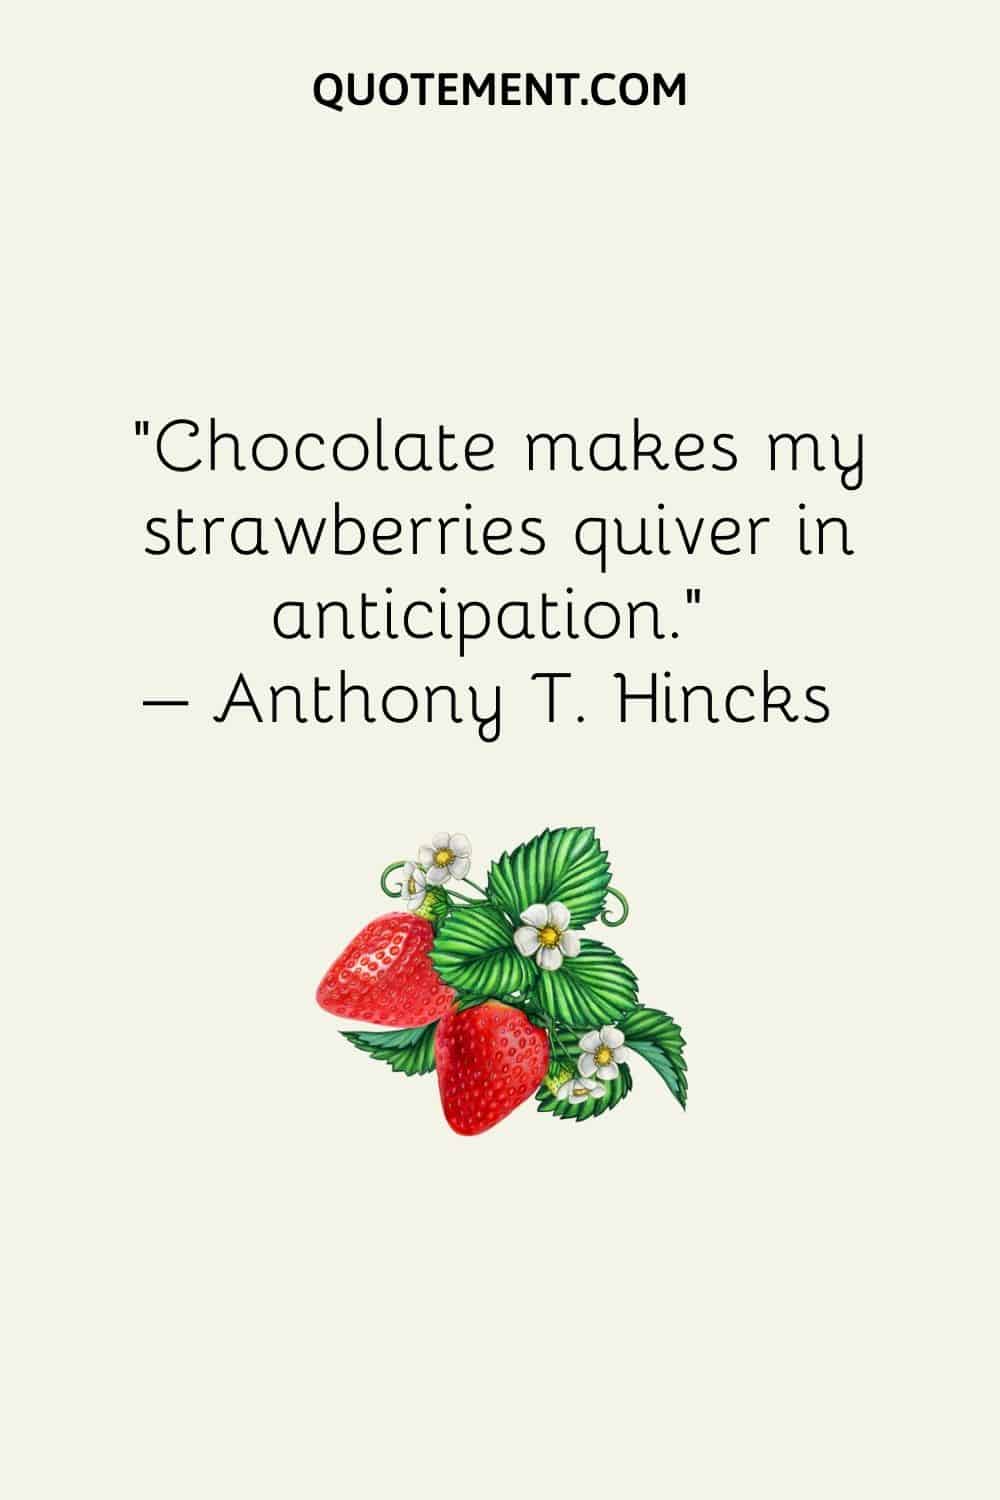 Chocolate makes my strawberries quiver in anticipation